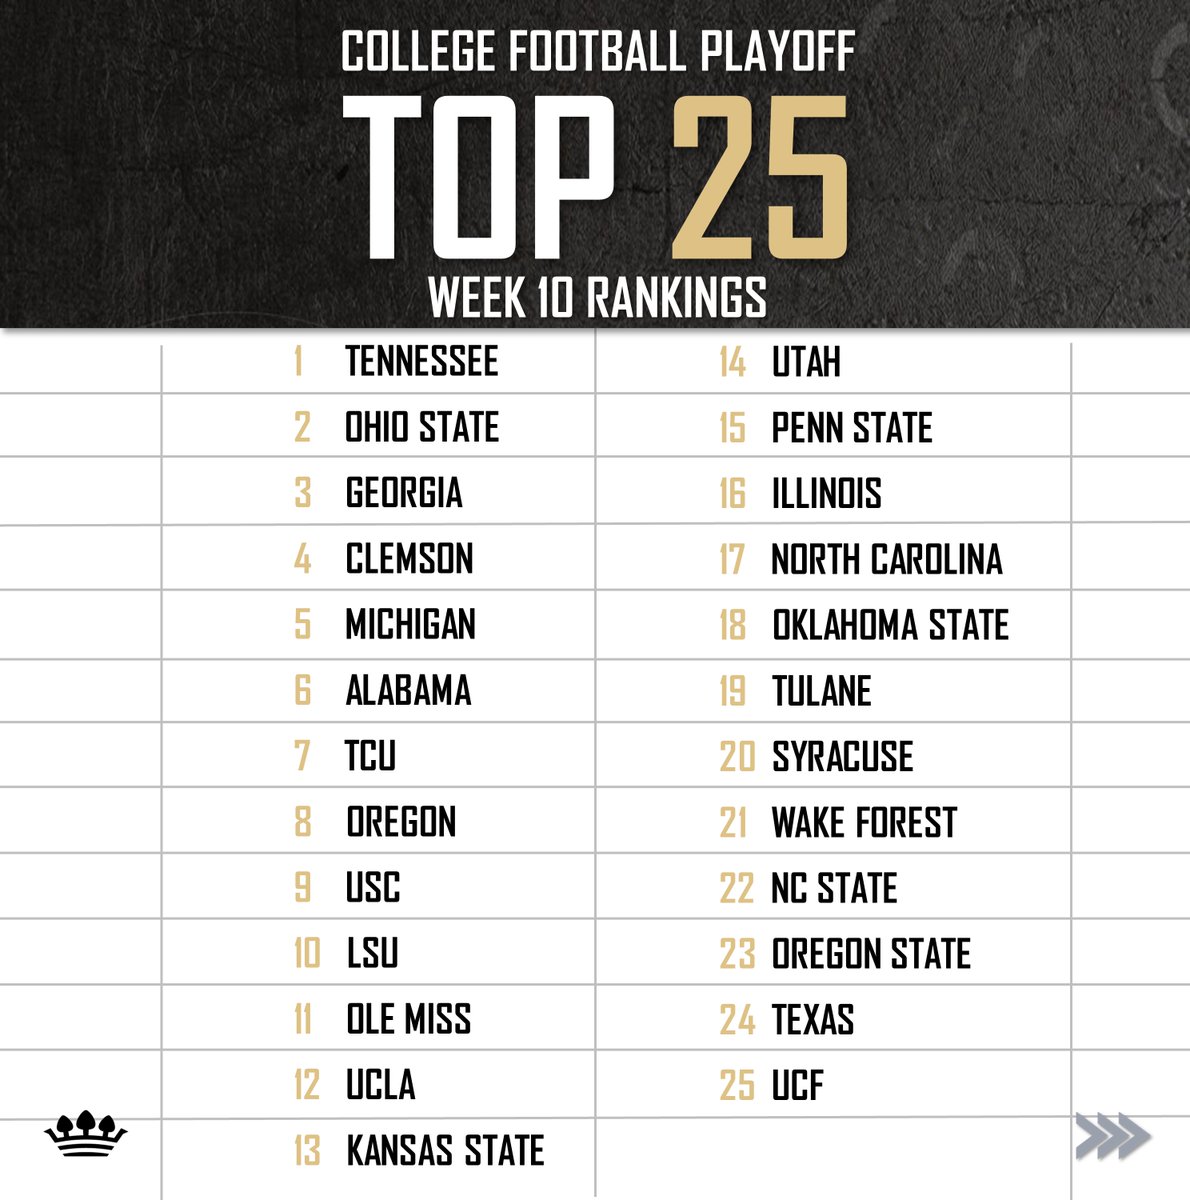 The first College Football Playoff rankings are here!

#collegefootballplayoff #collegefootball #ncaa #ncaafootball #playoffs #top25 #top25rankings #rankings https://t.co/KTVzfWJz0R